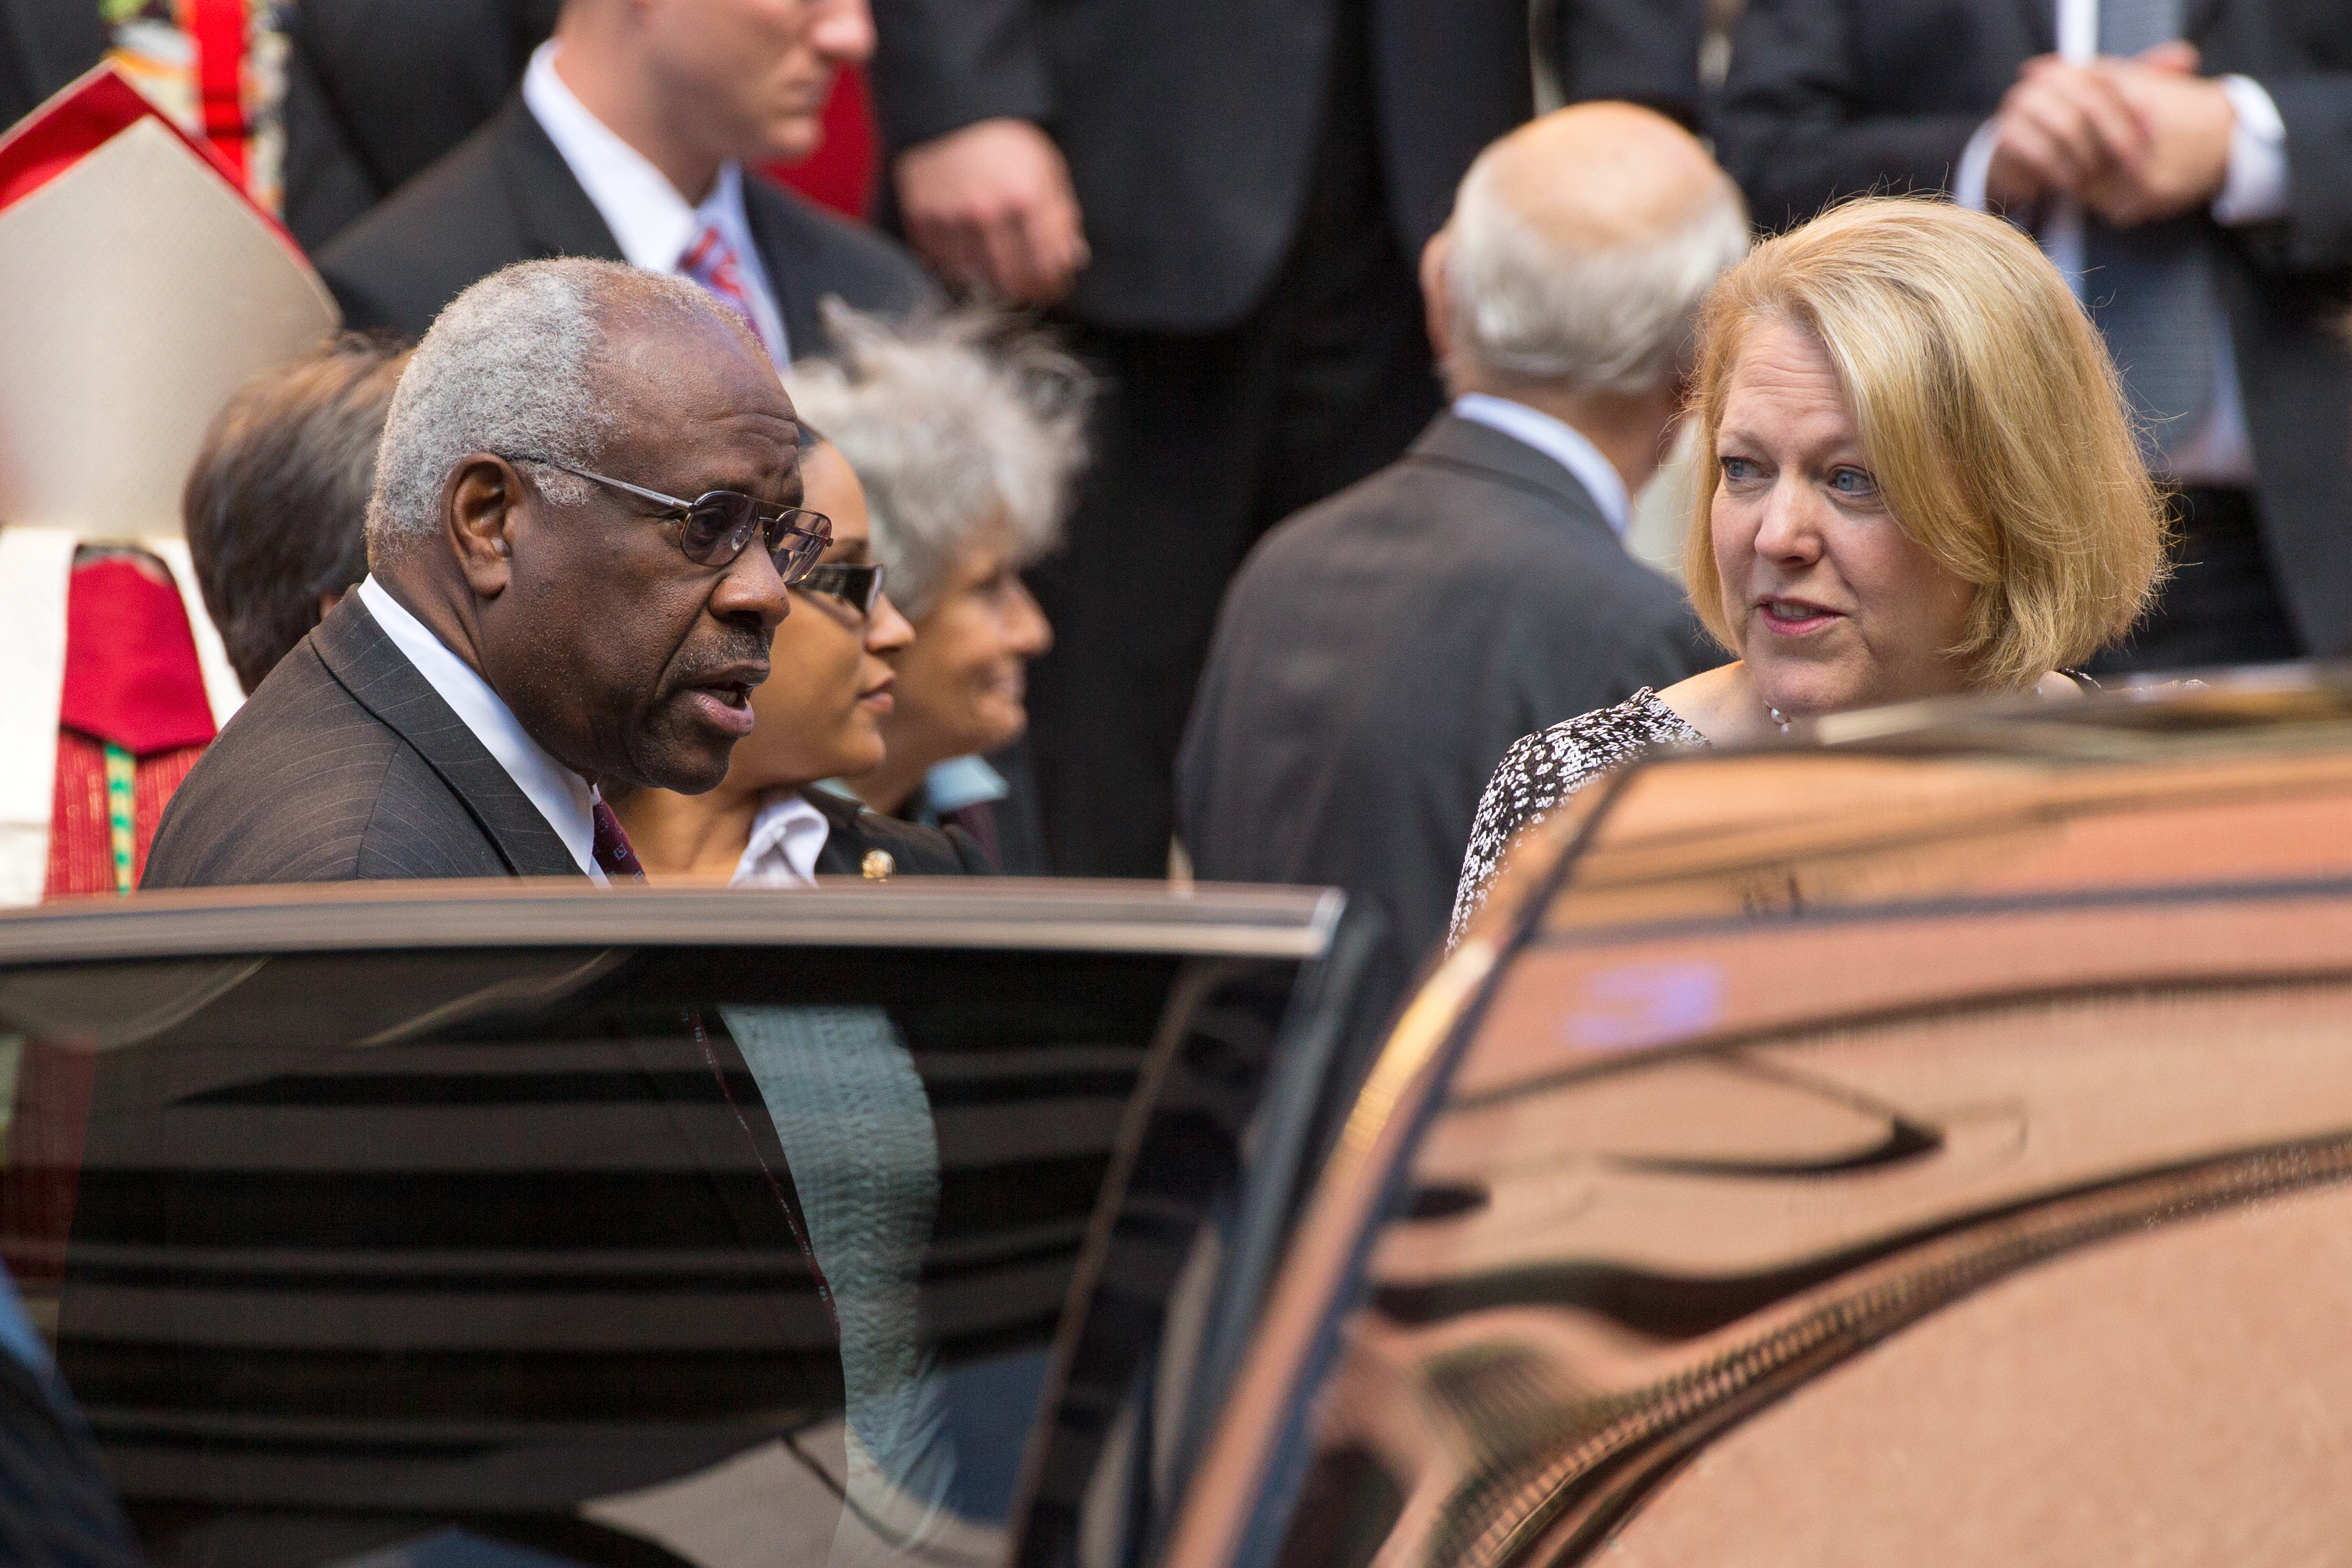 Justice Thomas and his wife exit following the Red Mass at the Cathedral of St. Matthew the Apostle in Washington